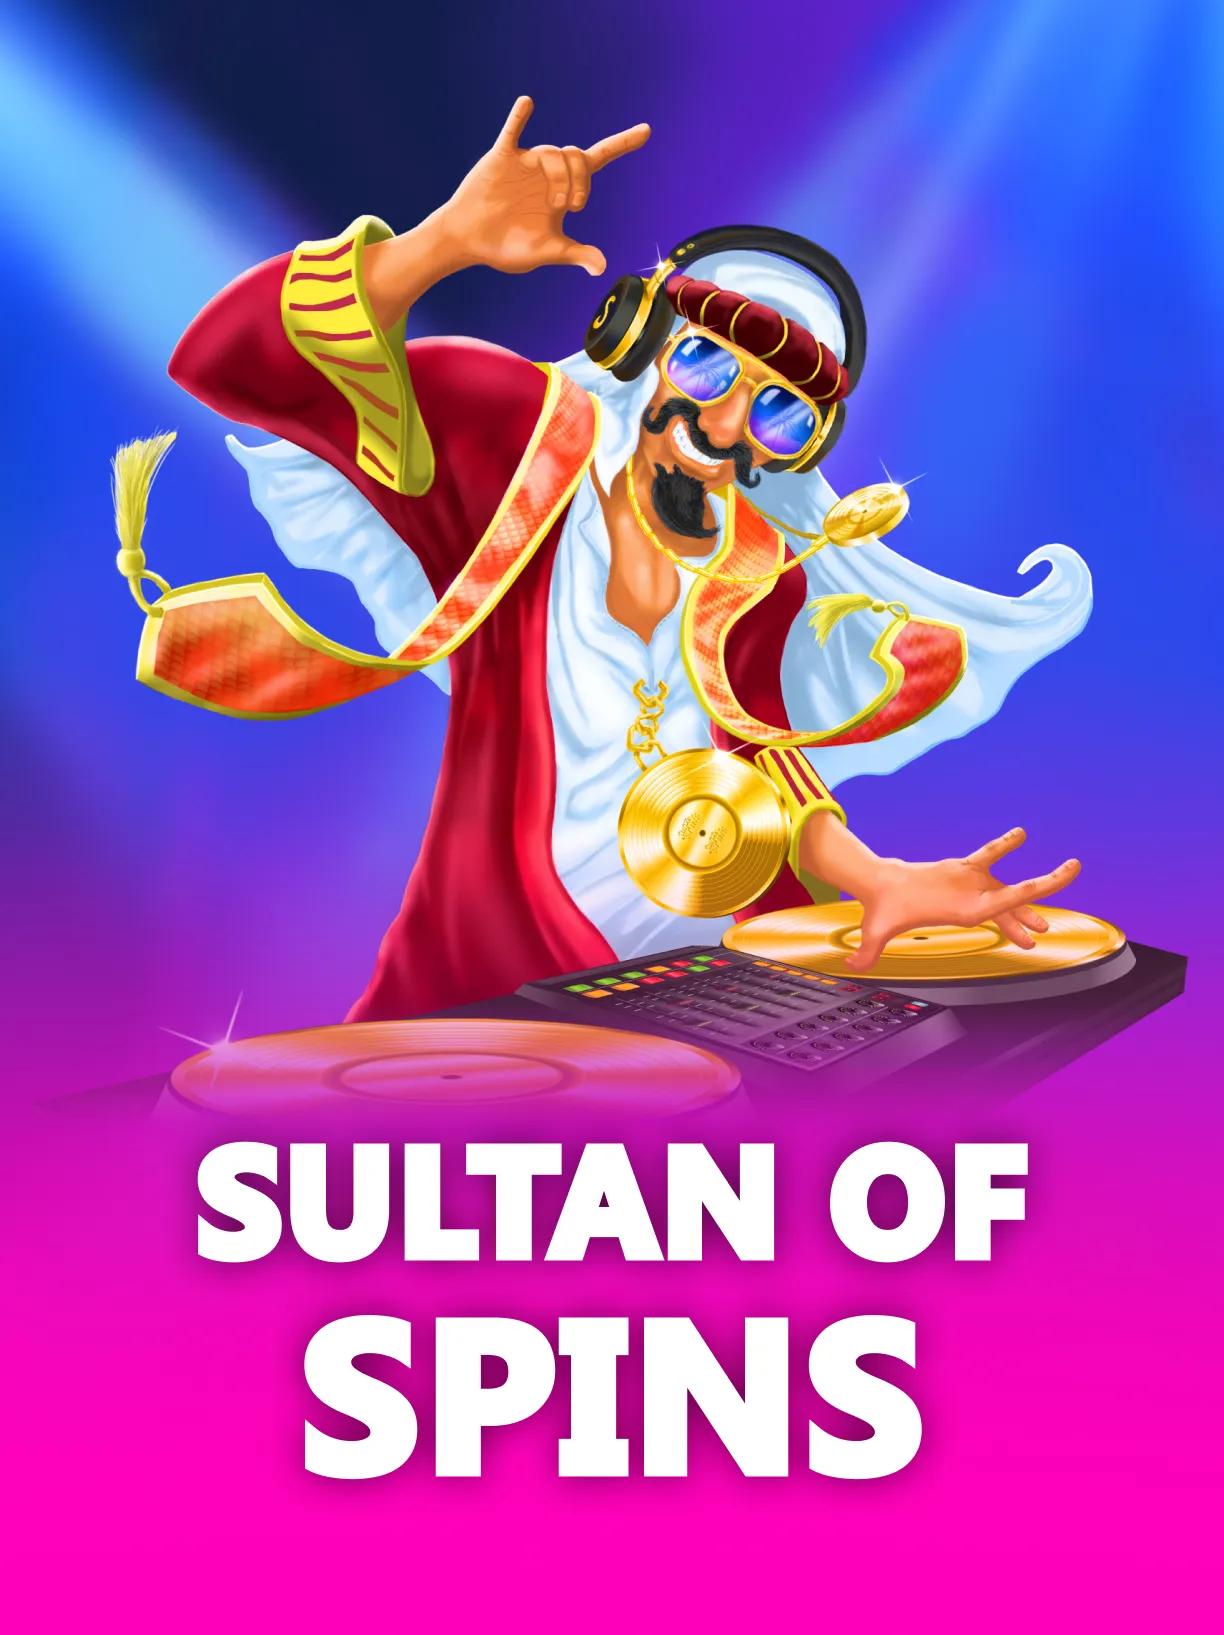 sf-sultan-of-spins-square.webp